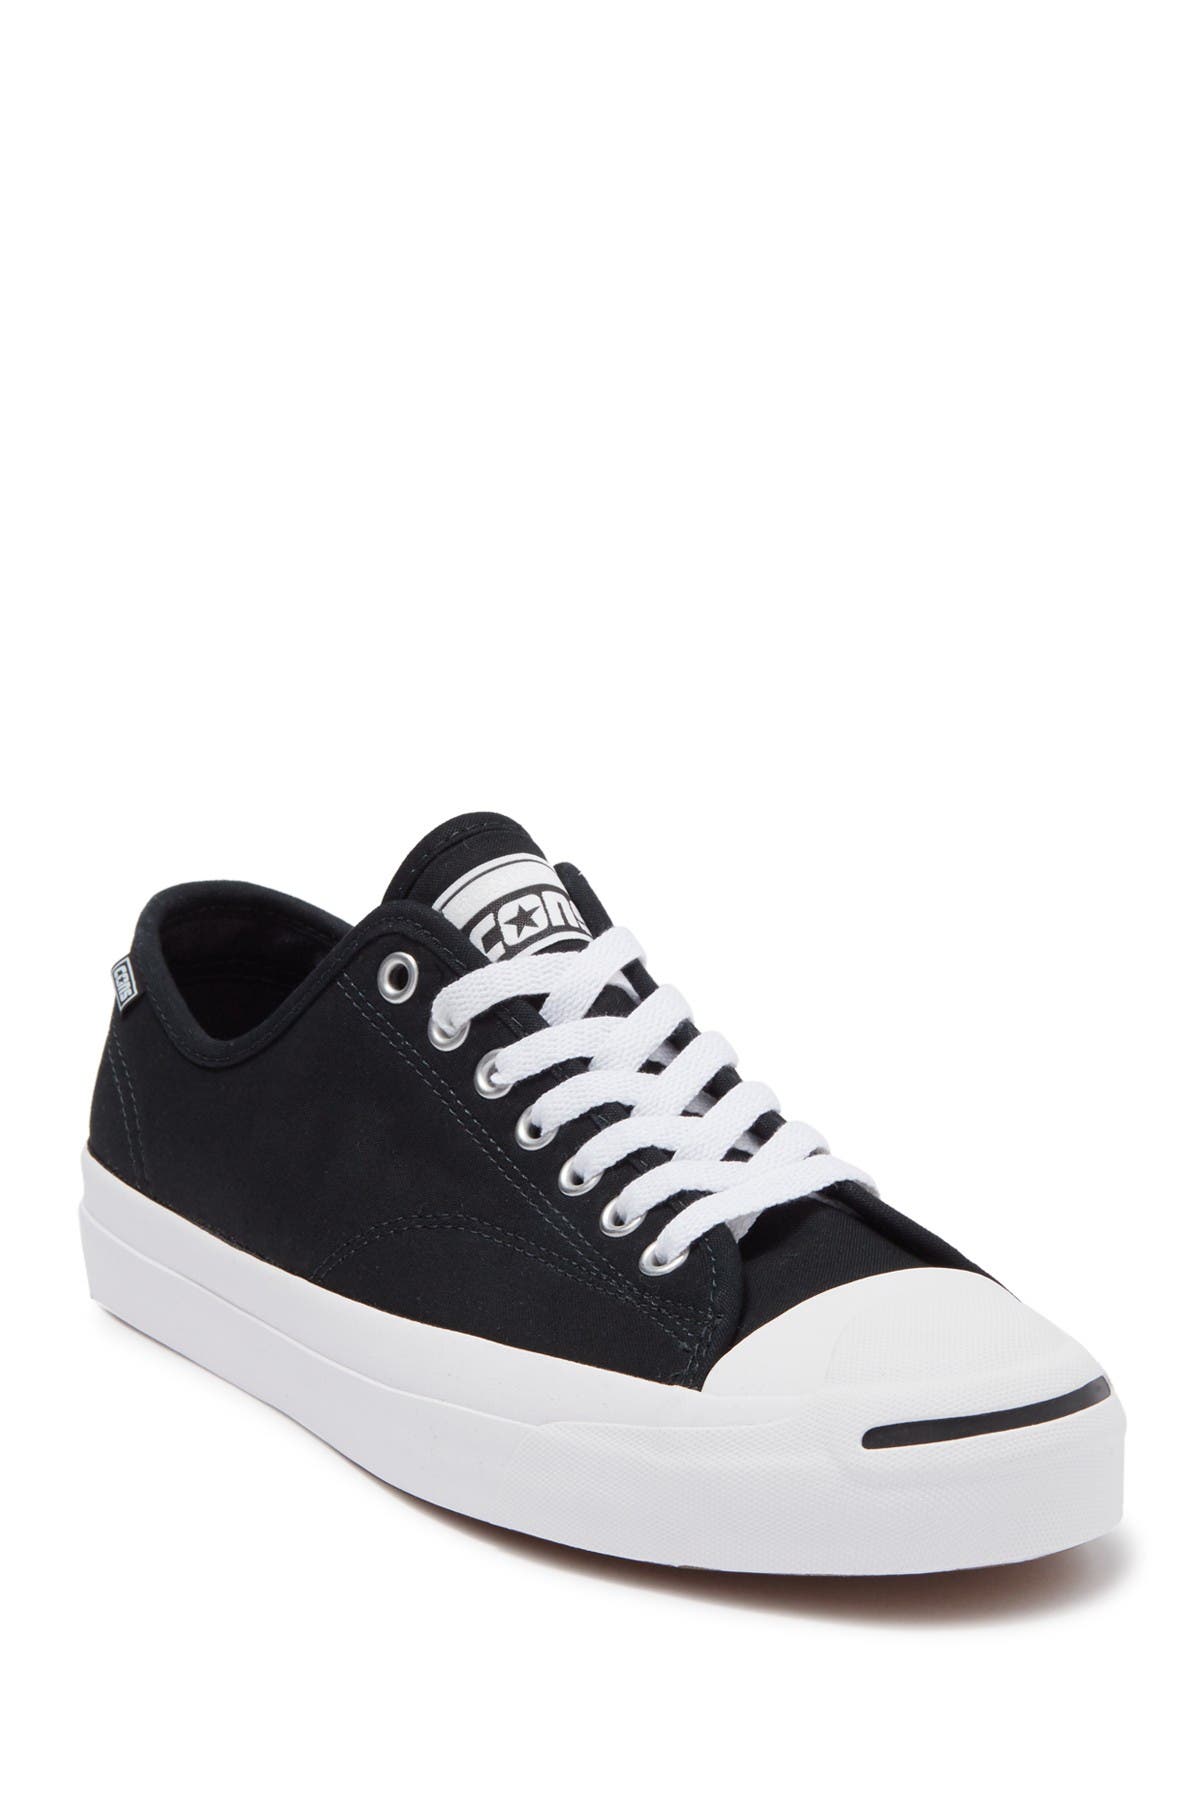 Converse | Jack Purcell Pro Oxford 